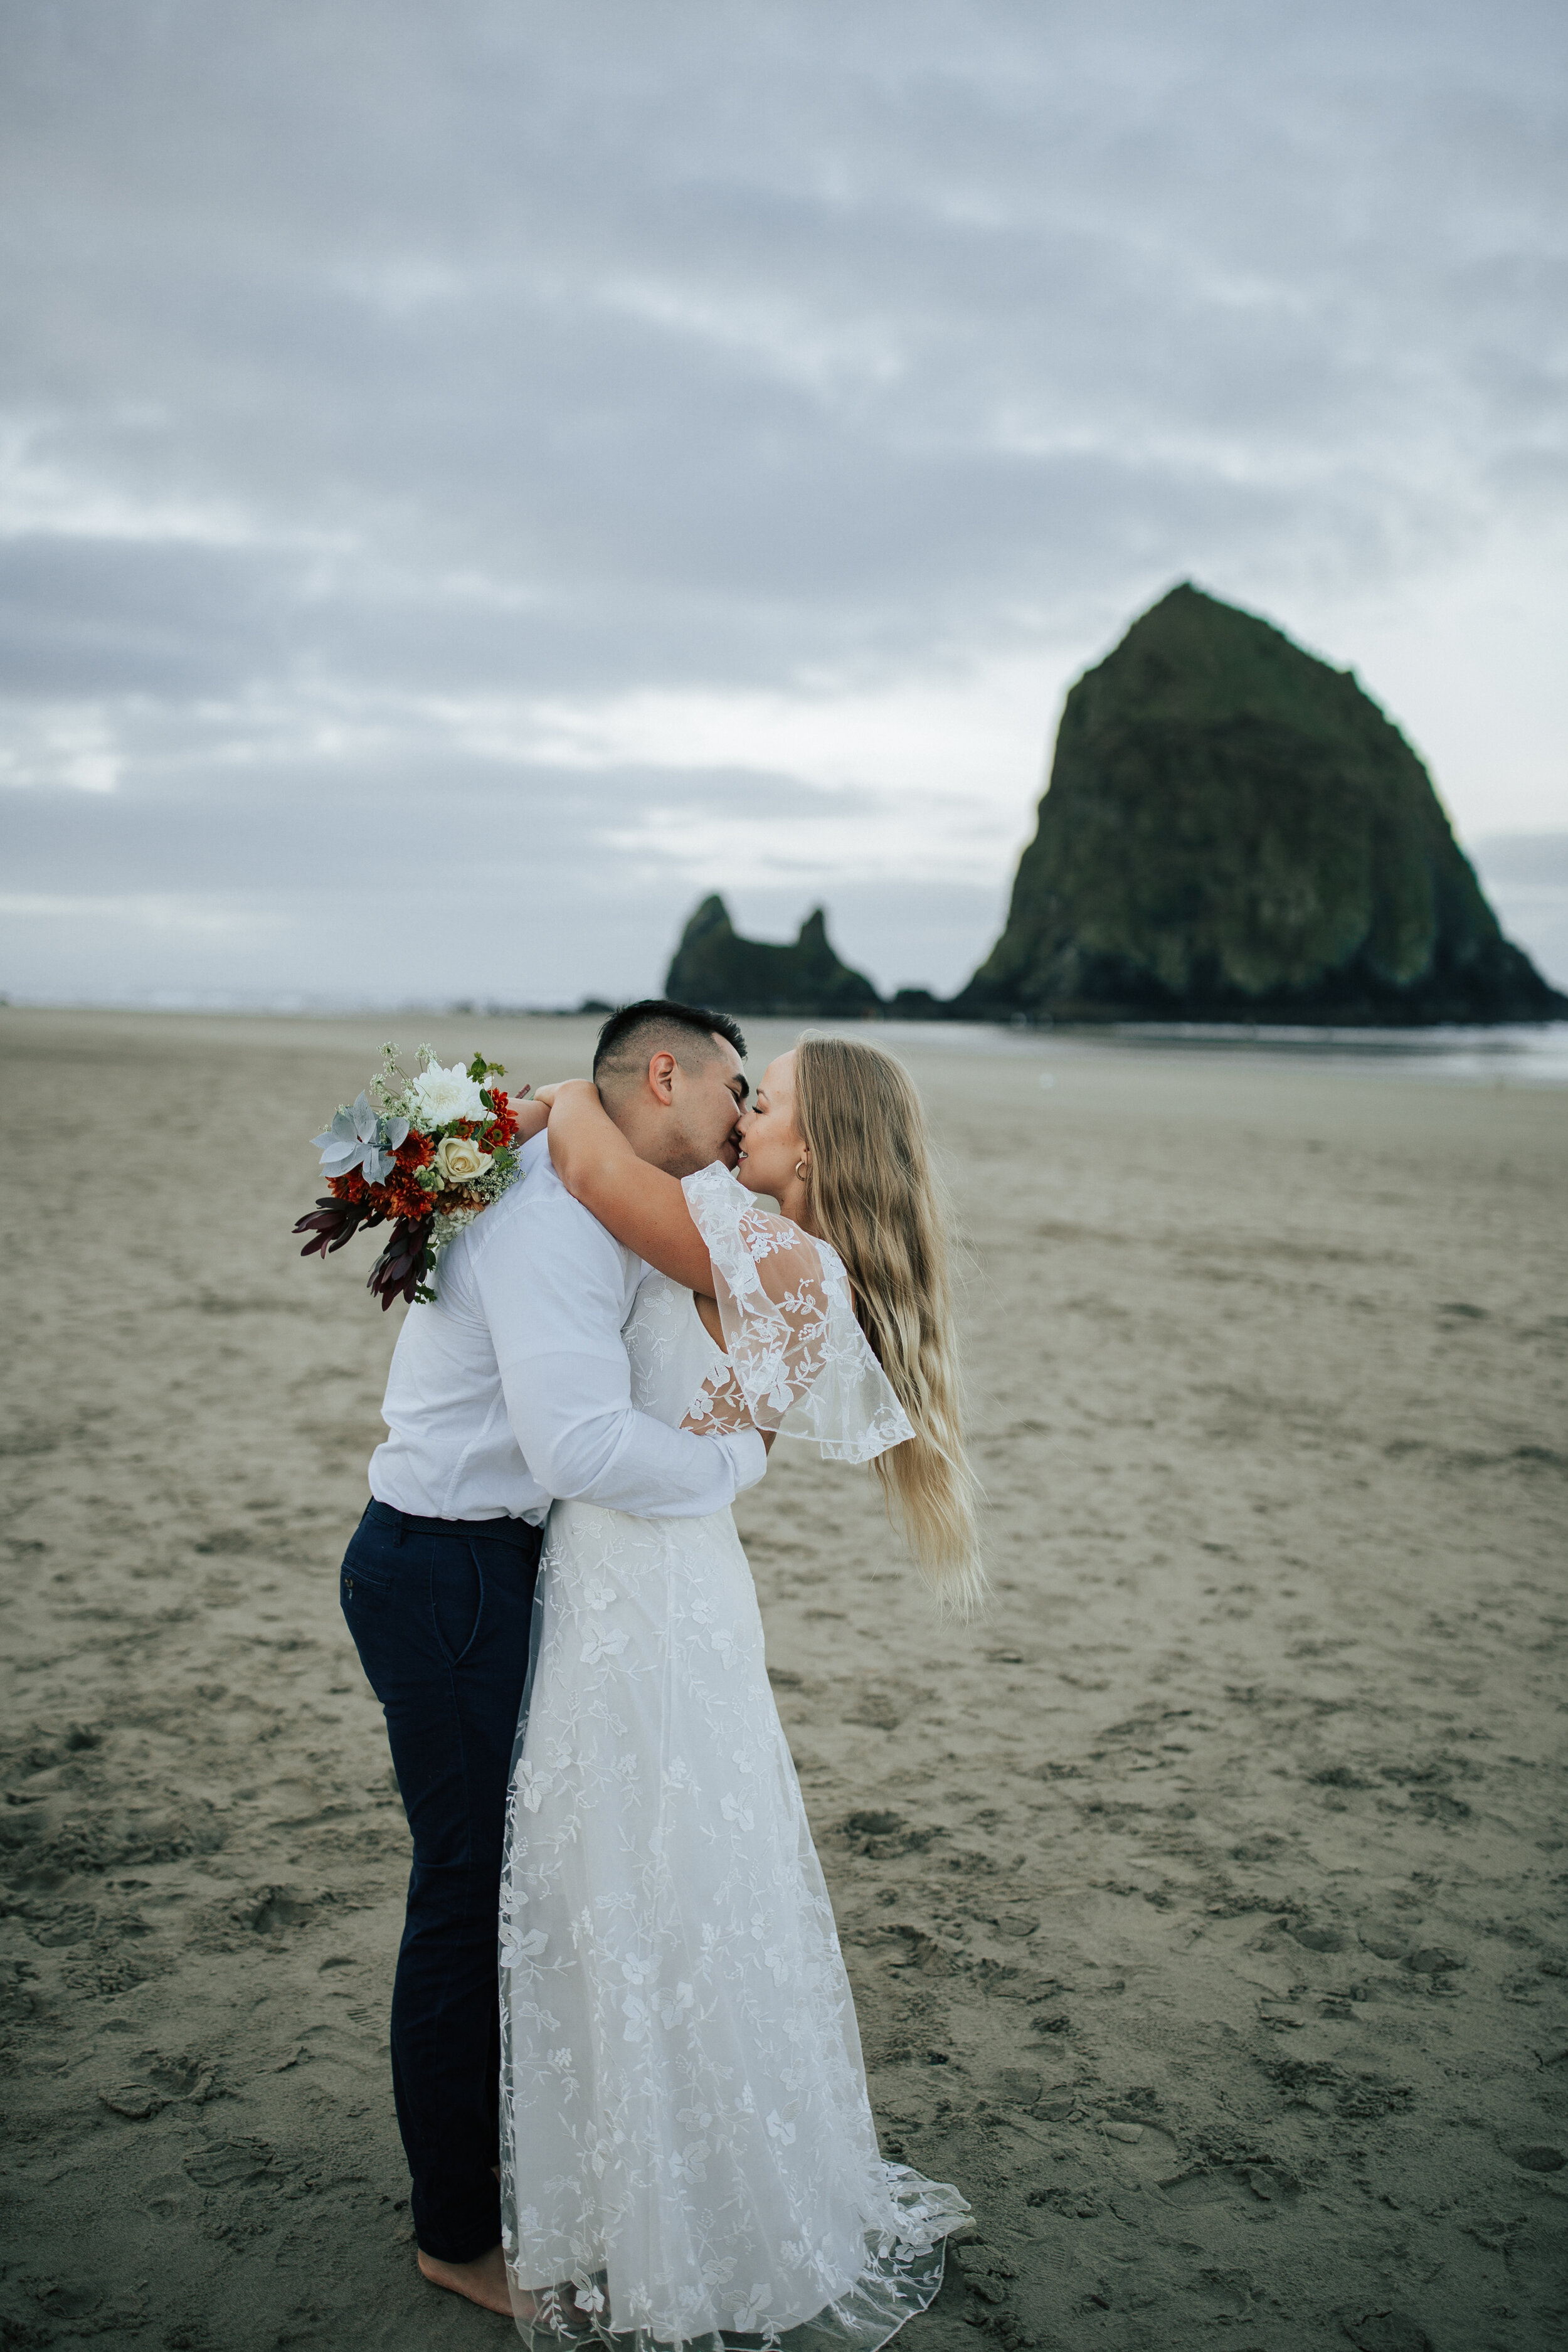  With a beautiful light and flouncy wedding dress a bride kisses her groom on an Oregon Beach during an elopement by Emily Jenkins Photography. floral wedding dress beach elopements beach wedding west coast beach elopement #emilyjenkinsphotography #e